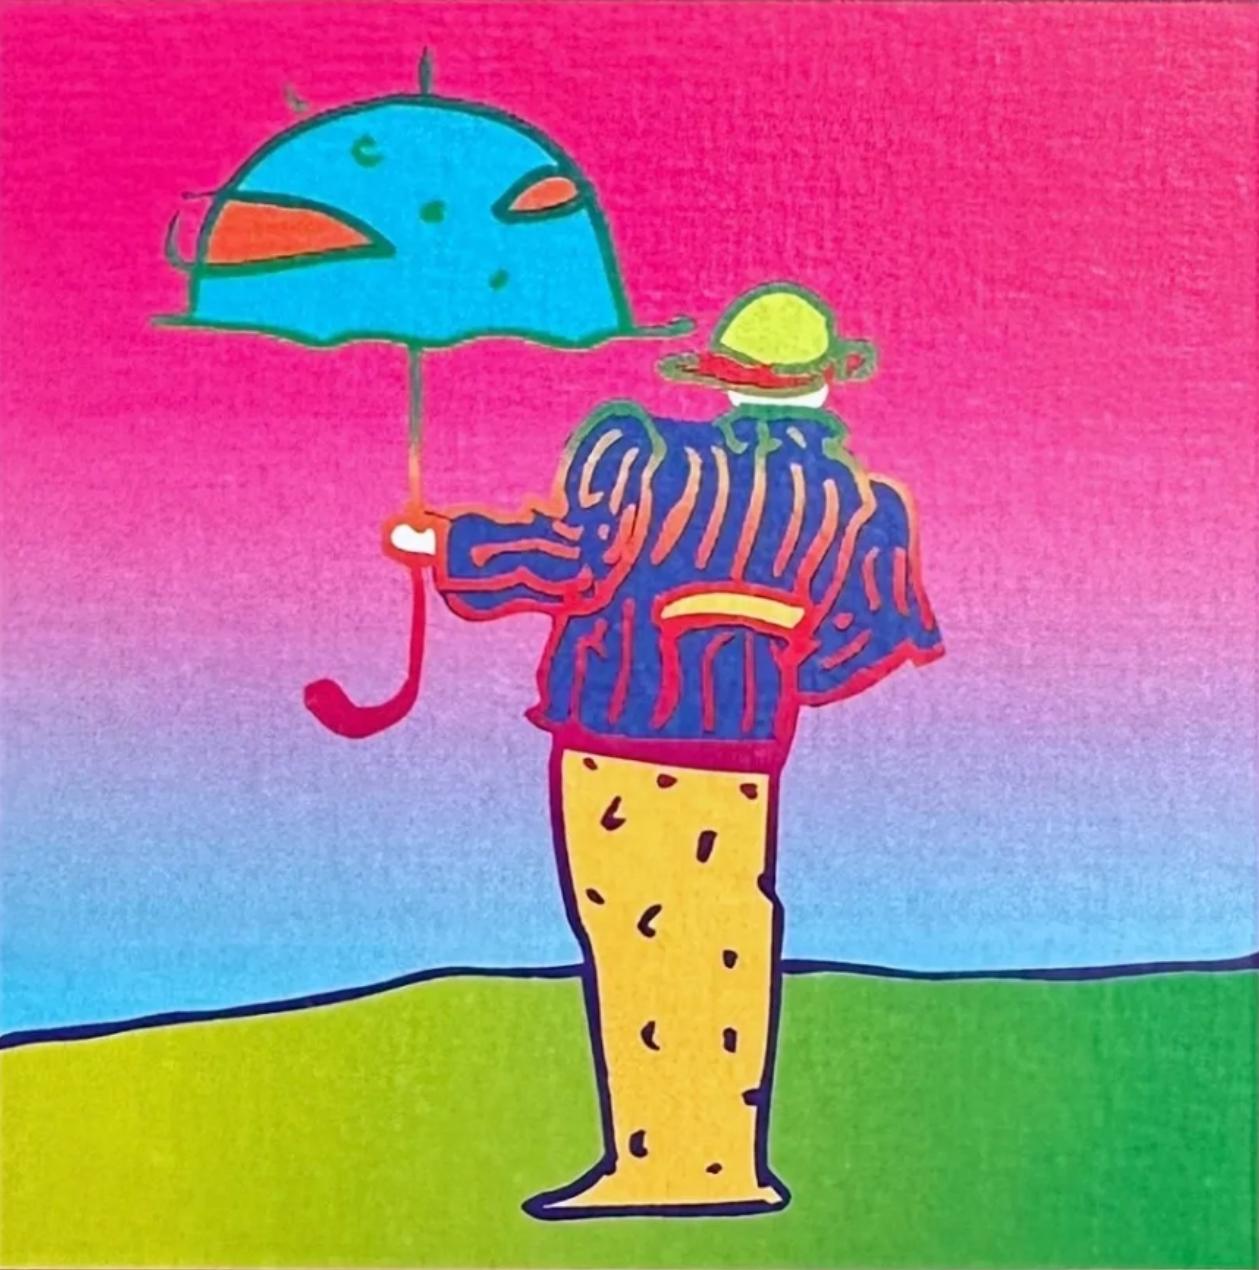 Artist: Peter Max (1937)
Title: Cosmic Umbrella Man
Year: 2003
Edition: 496/500, plus proofs
Medium: Lithograph on Lustro Saxony paper
Size: 3.43 x 2.62 inches
Condition: Excellent
Inscription: Signed and numbered by the artist.
Notes: Published by